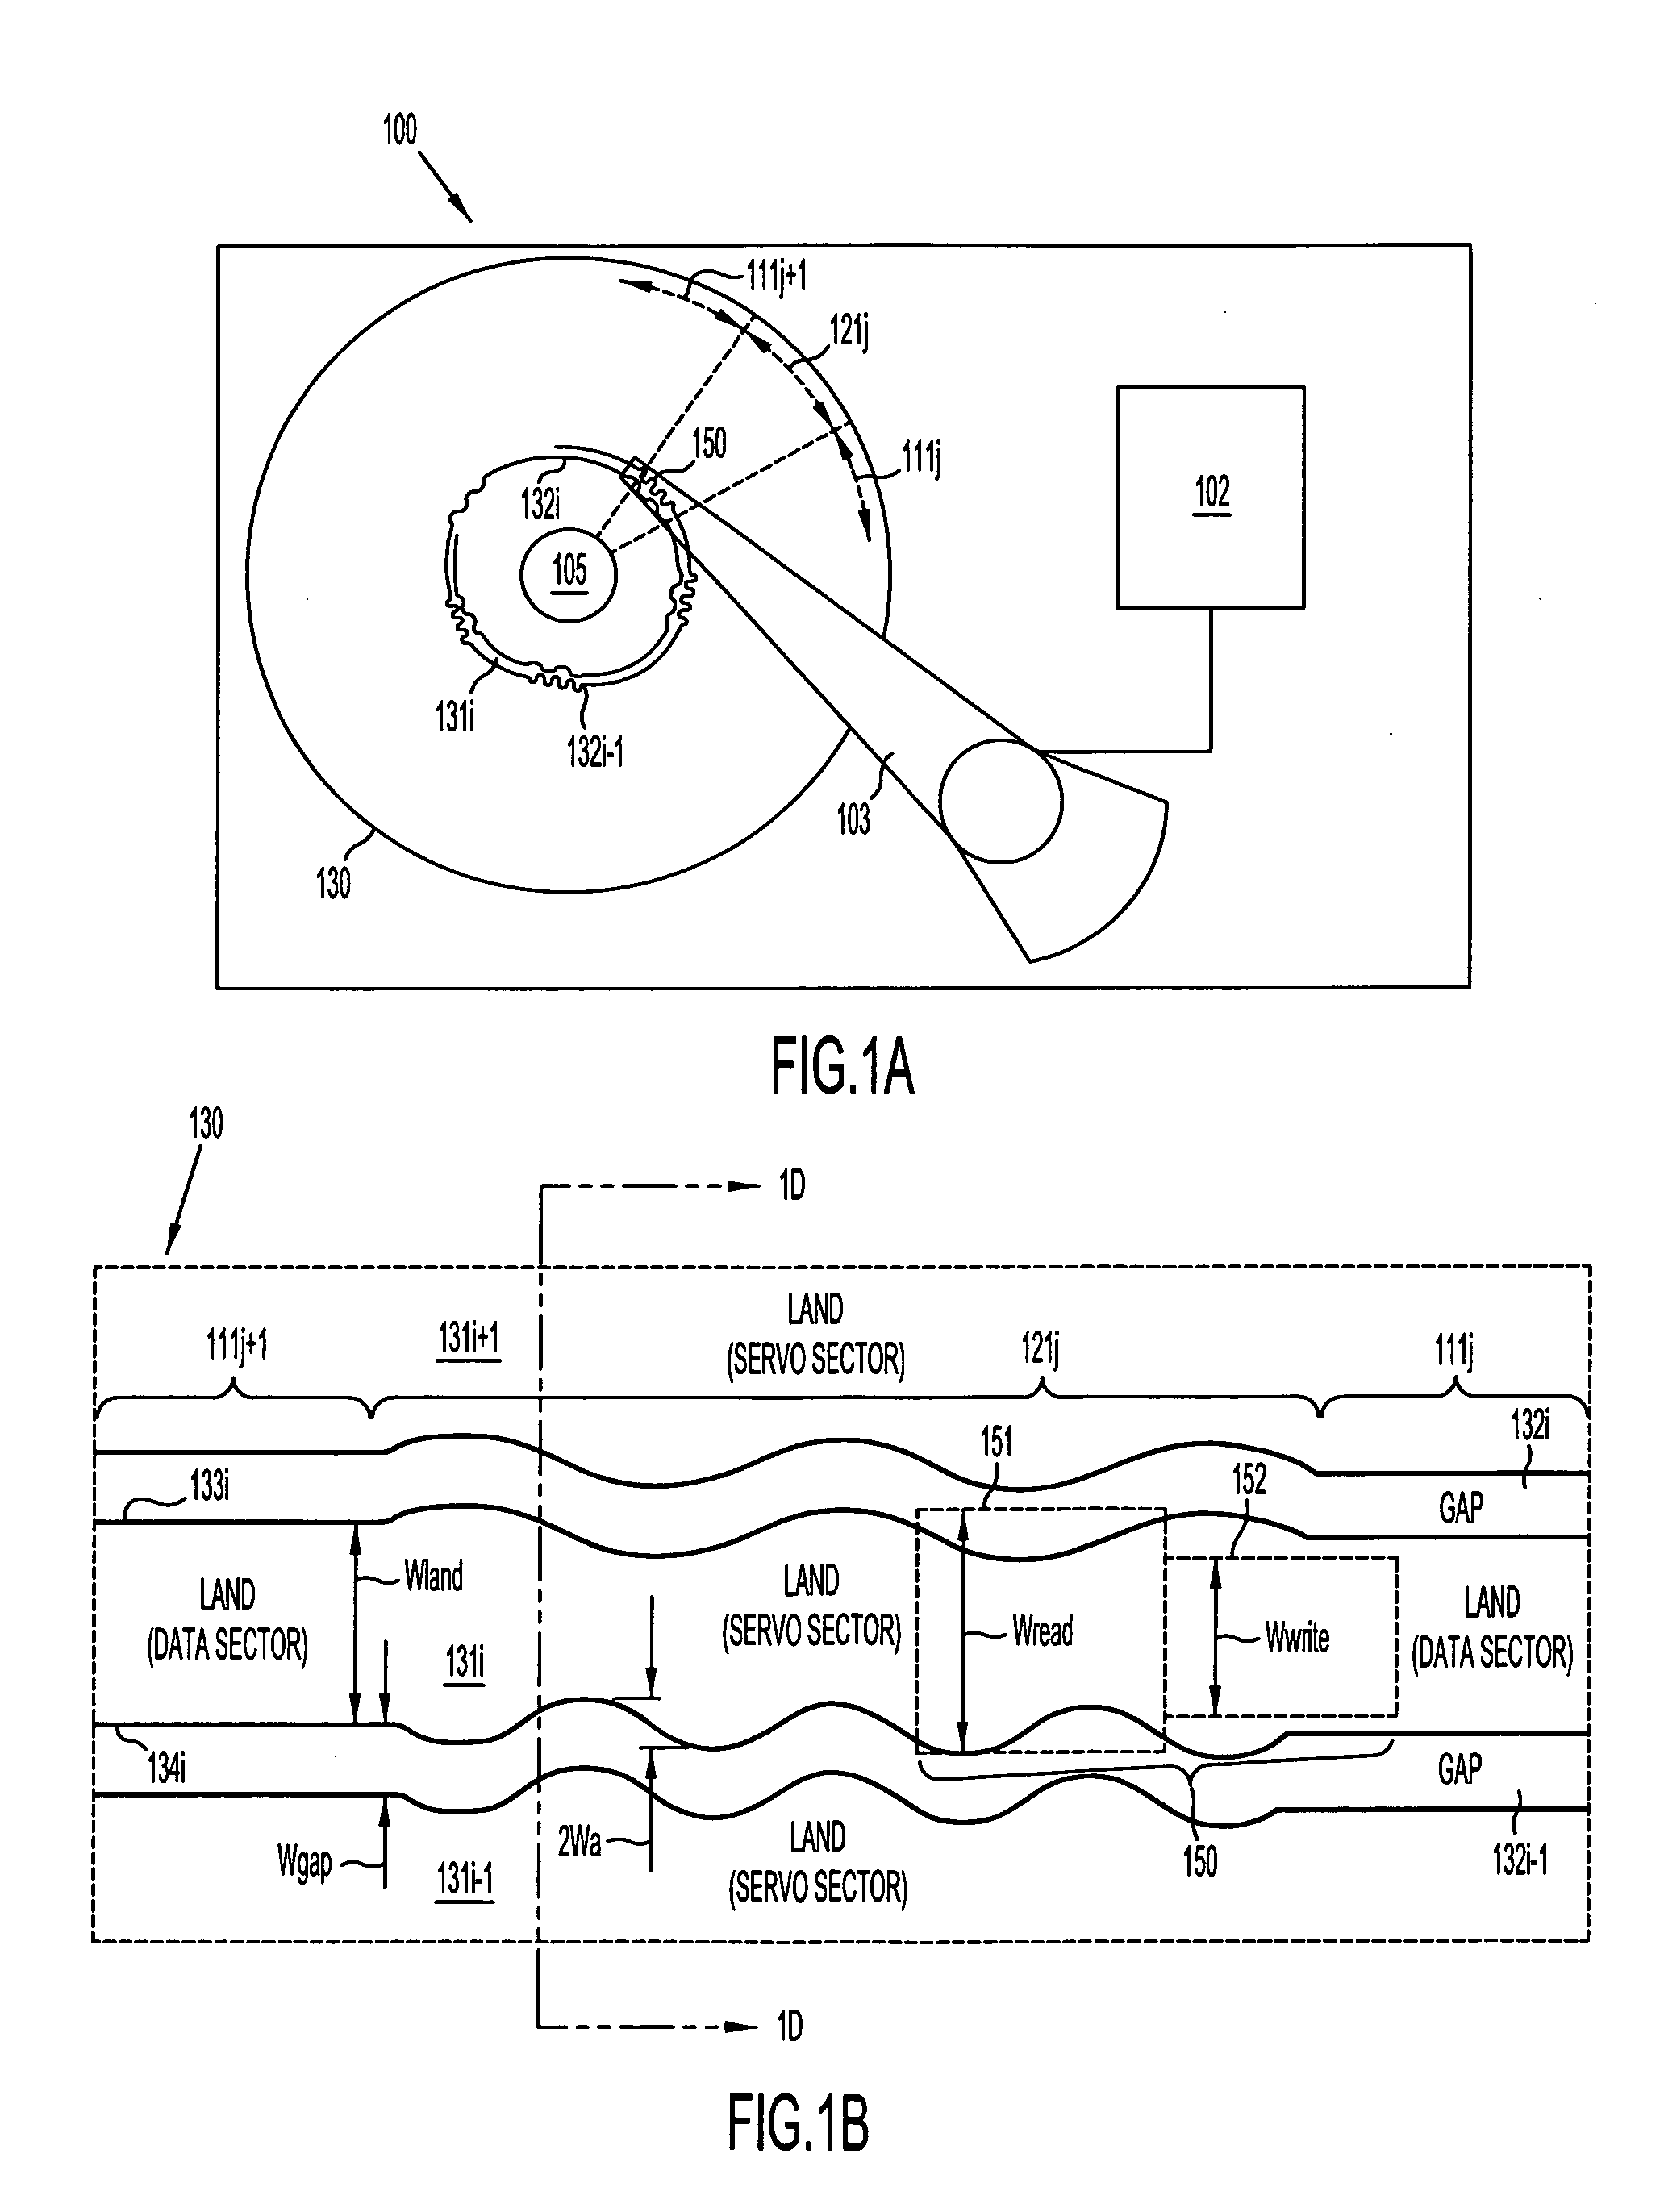 Modulation of sidewalls of servo sectors of a magnetic disk and the resultant disk